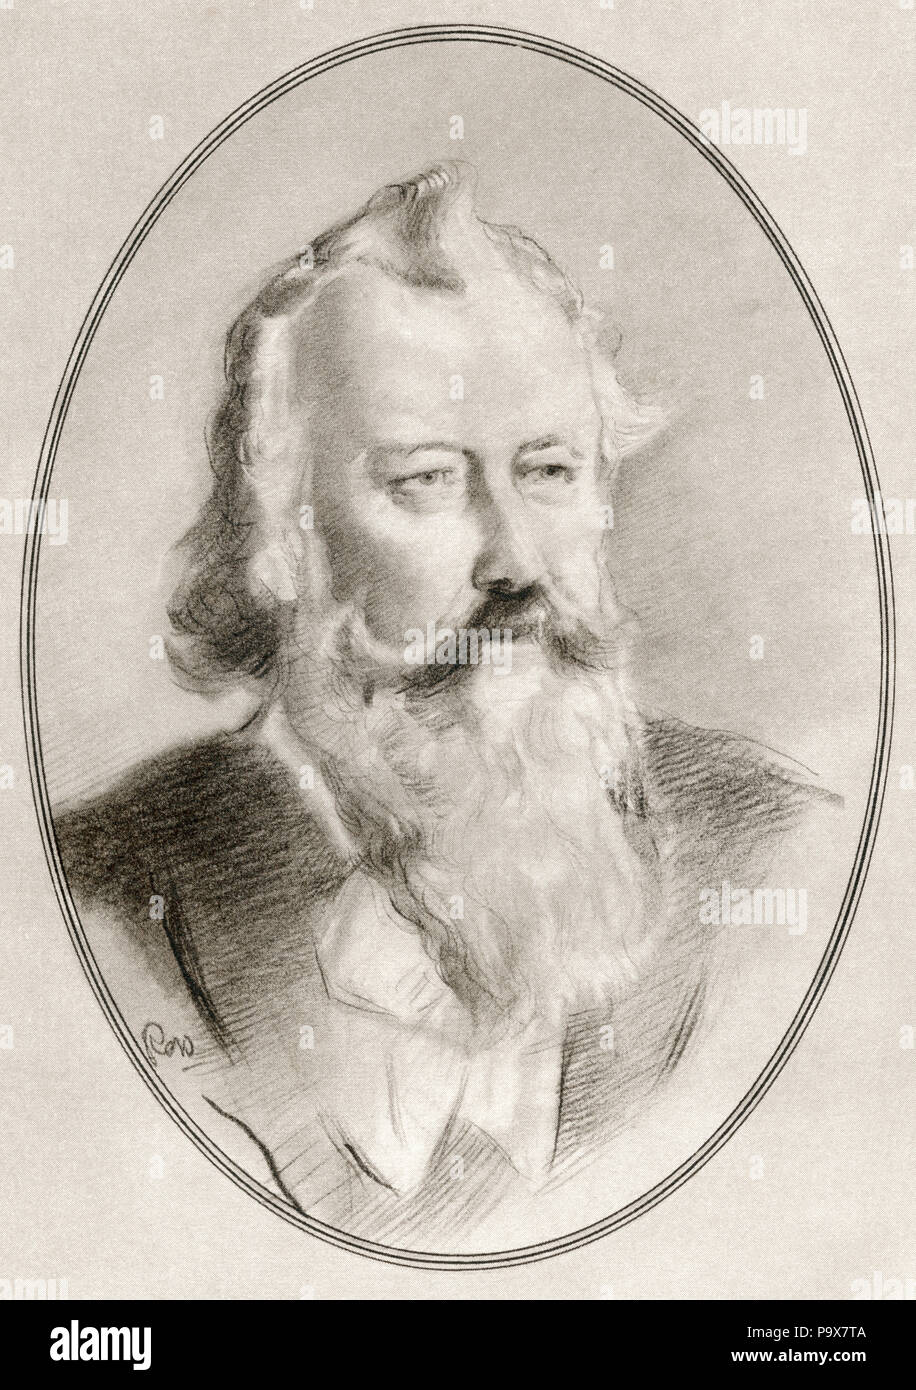 Johannes Brahms, 1833 – 1897.  German composer and pianist of the Romantic period.  Illustration by Gordon Ross, American artist and illustrator (1873-1946), from Living Biographies of Great Composers. Stock Photo